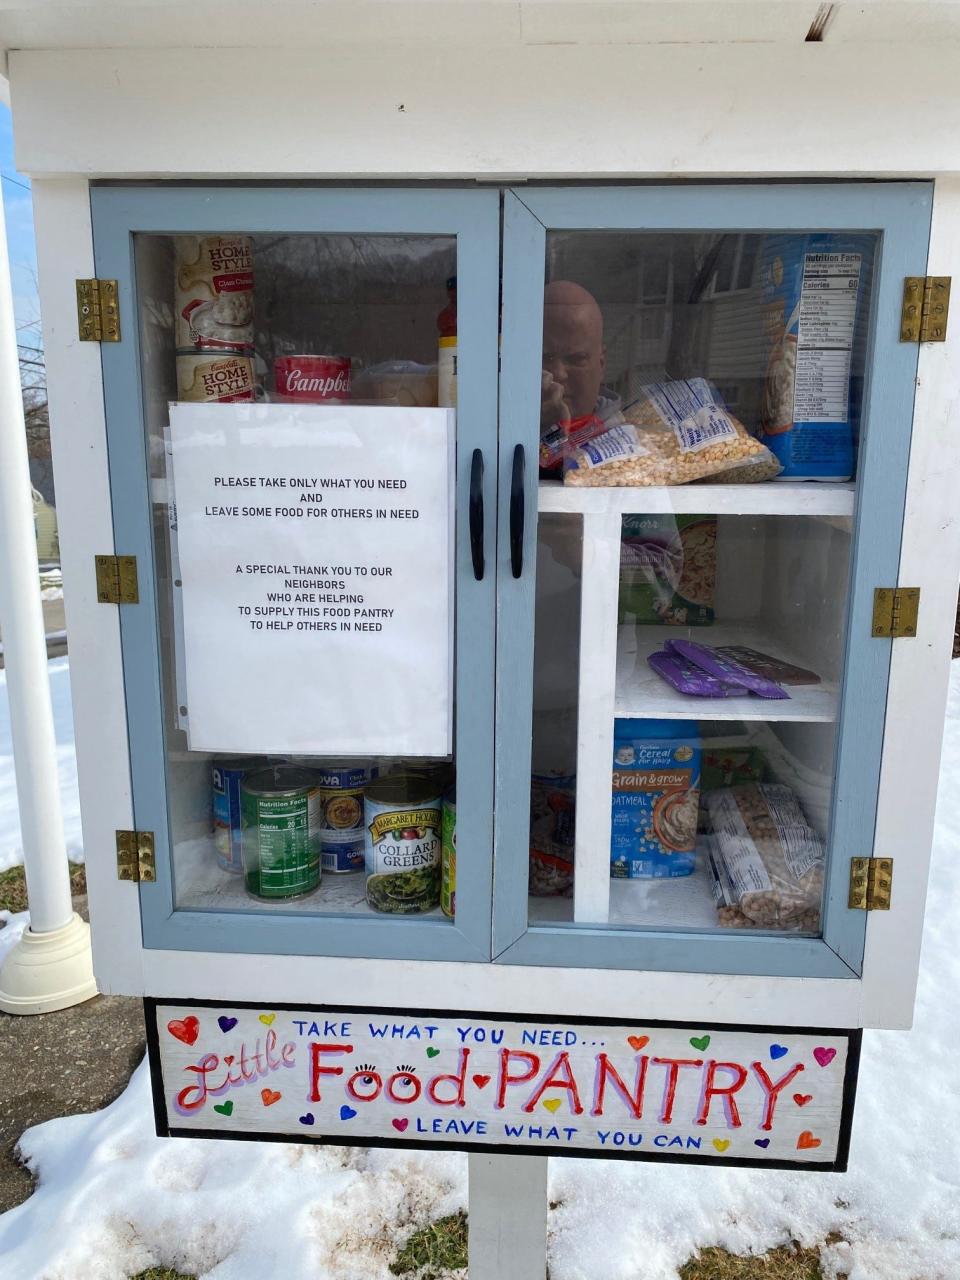 Little Food Pantry located outside the Living Hope Presbyterian Church on Maplewood Road in Clifton. The pantries are informal and meant to provide non-perishable food for those with food insecurity.